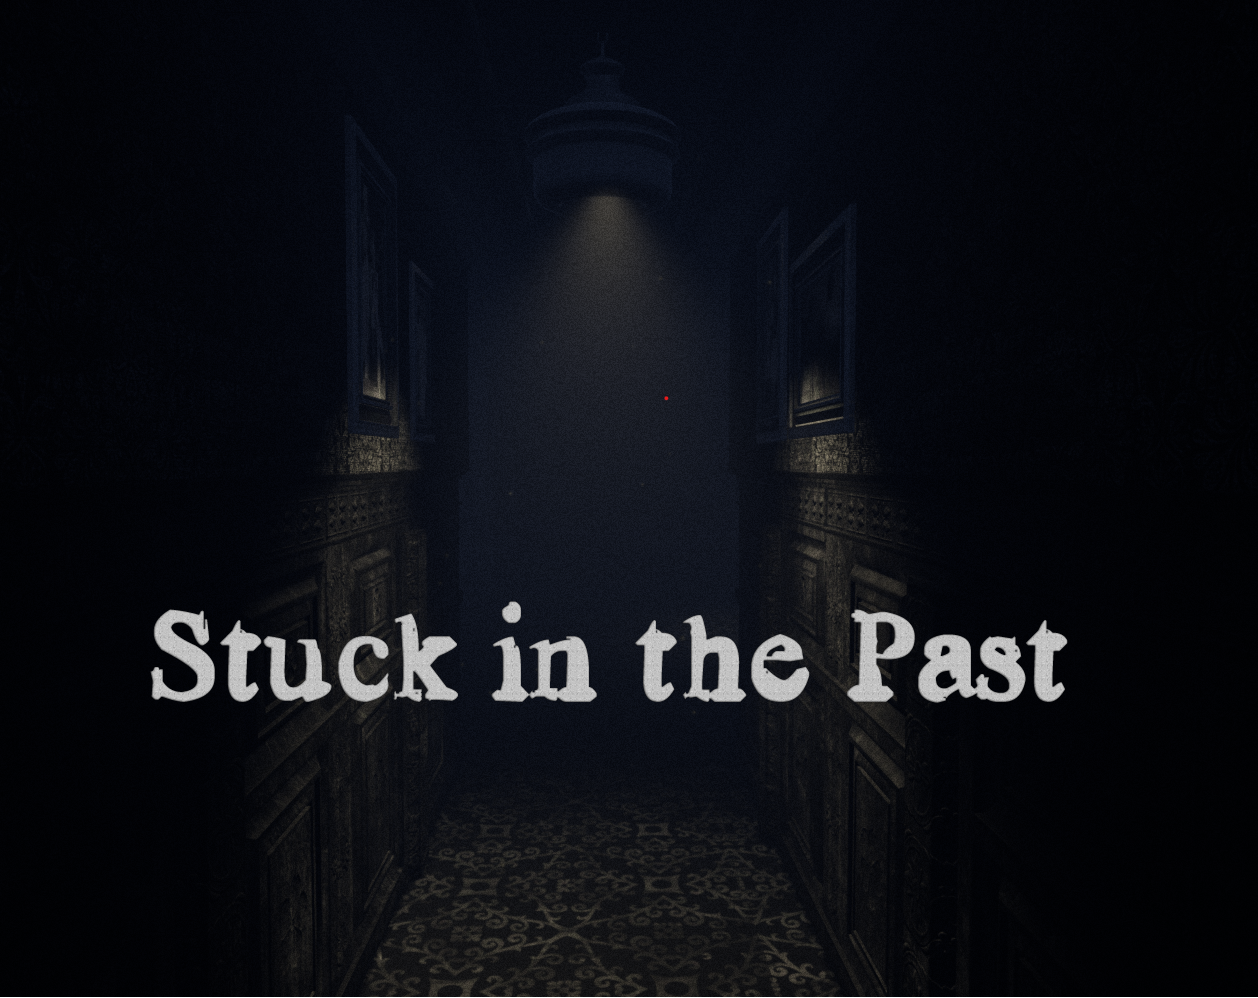 Stuck in the Past by thorlak